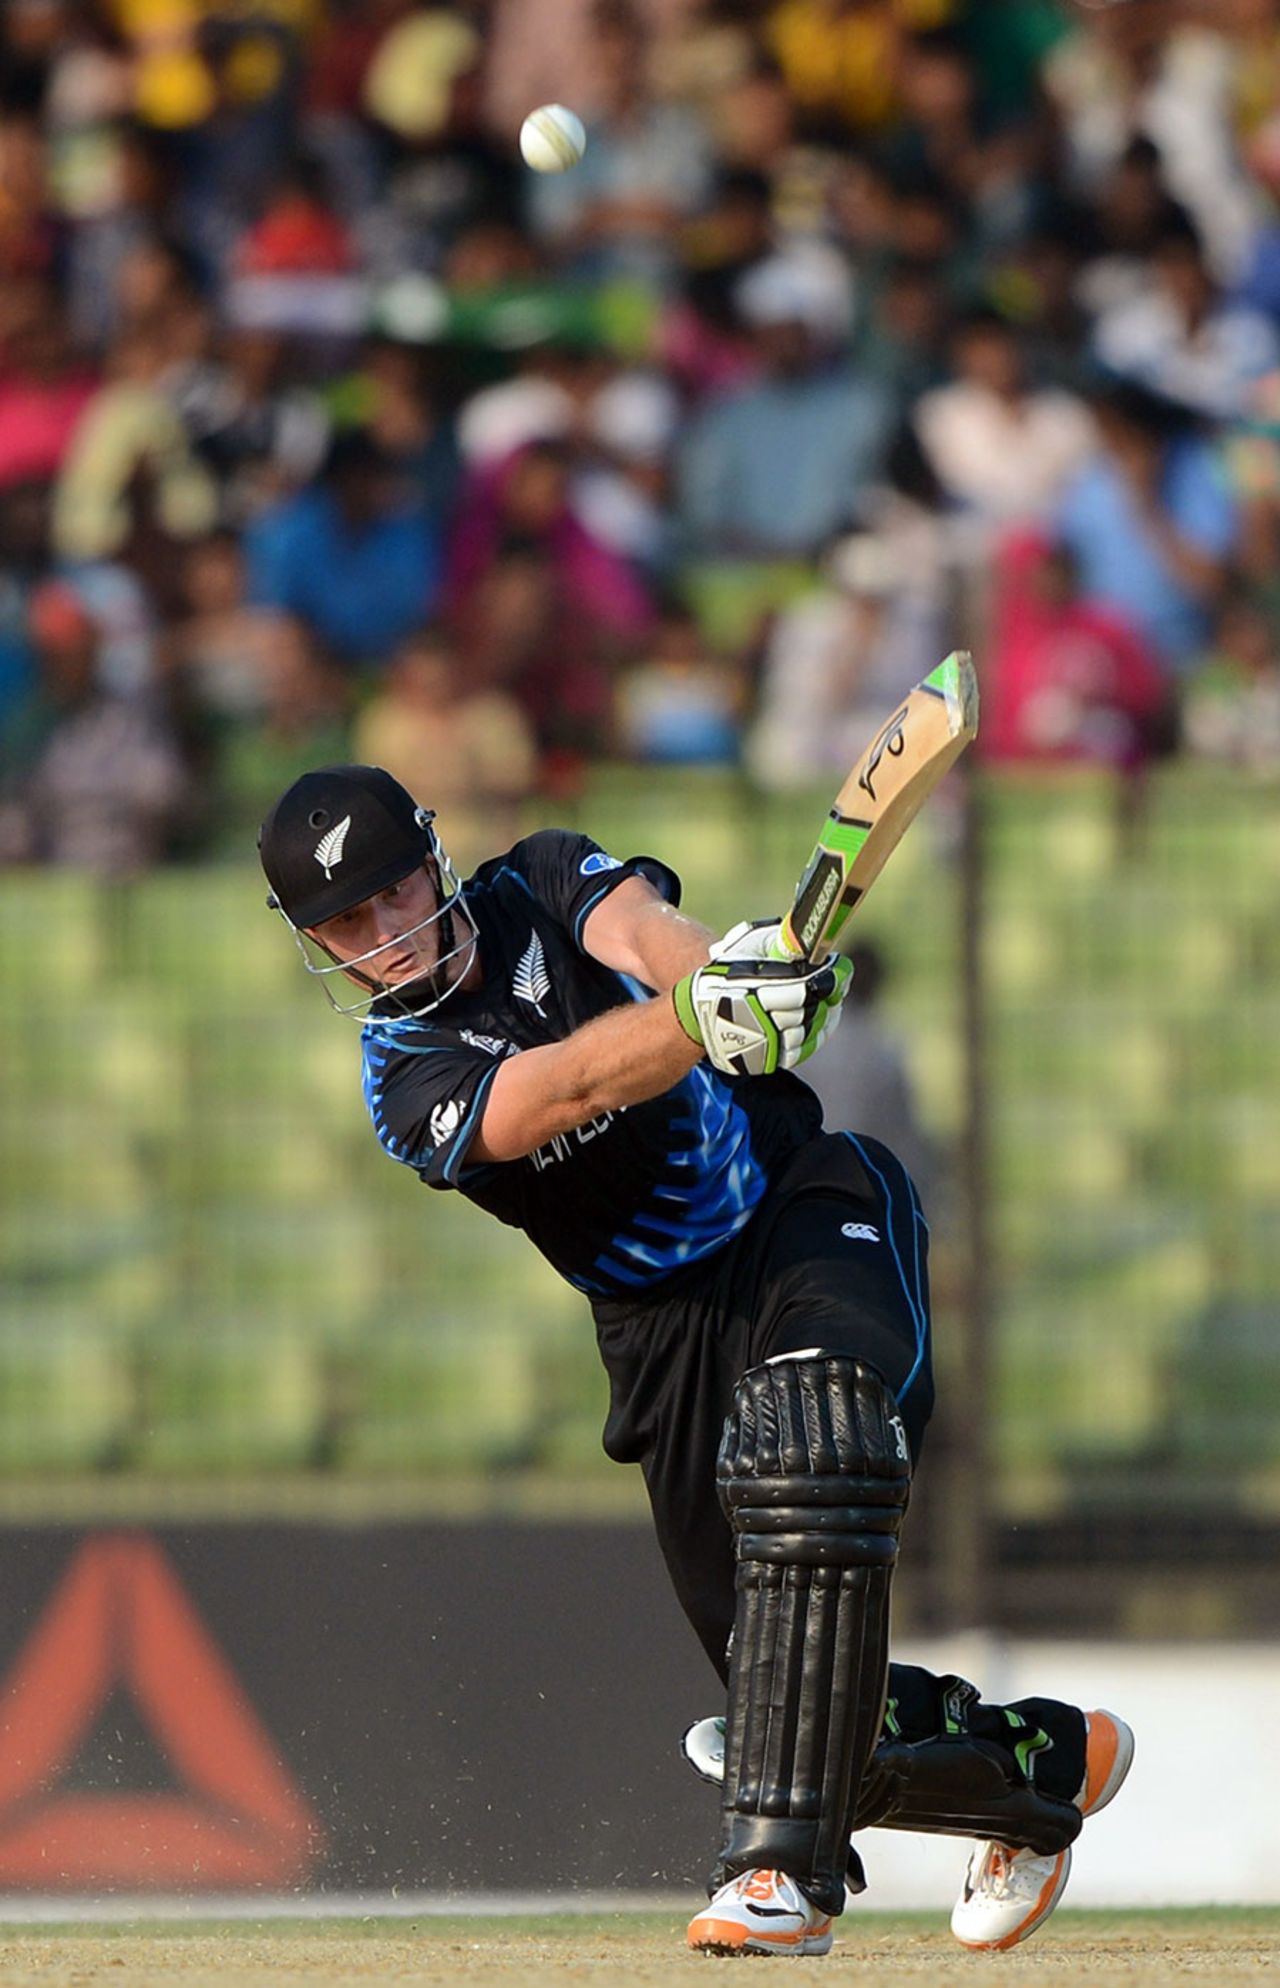 Martin Guptill goes over the top during his innings of 62, Australia v New Zealand, World T20 warm-up match, Fatullah, March 19, 2014